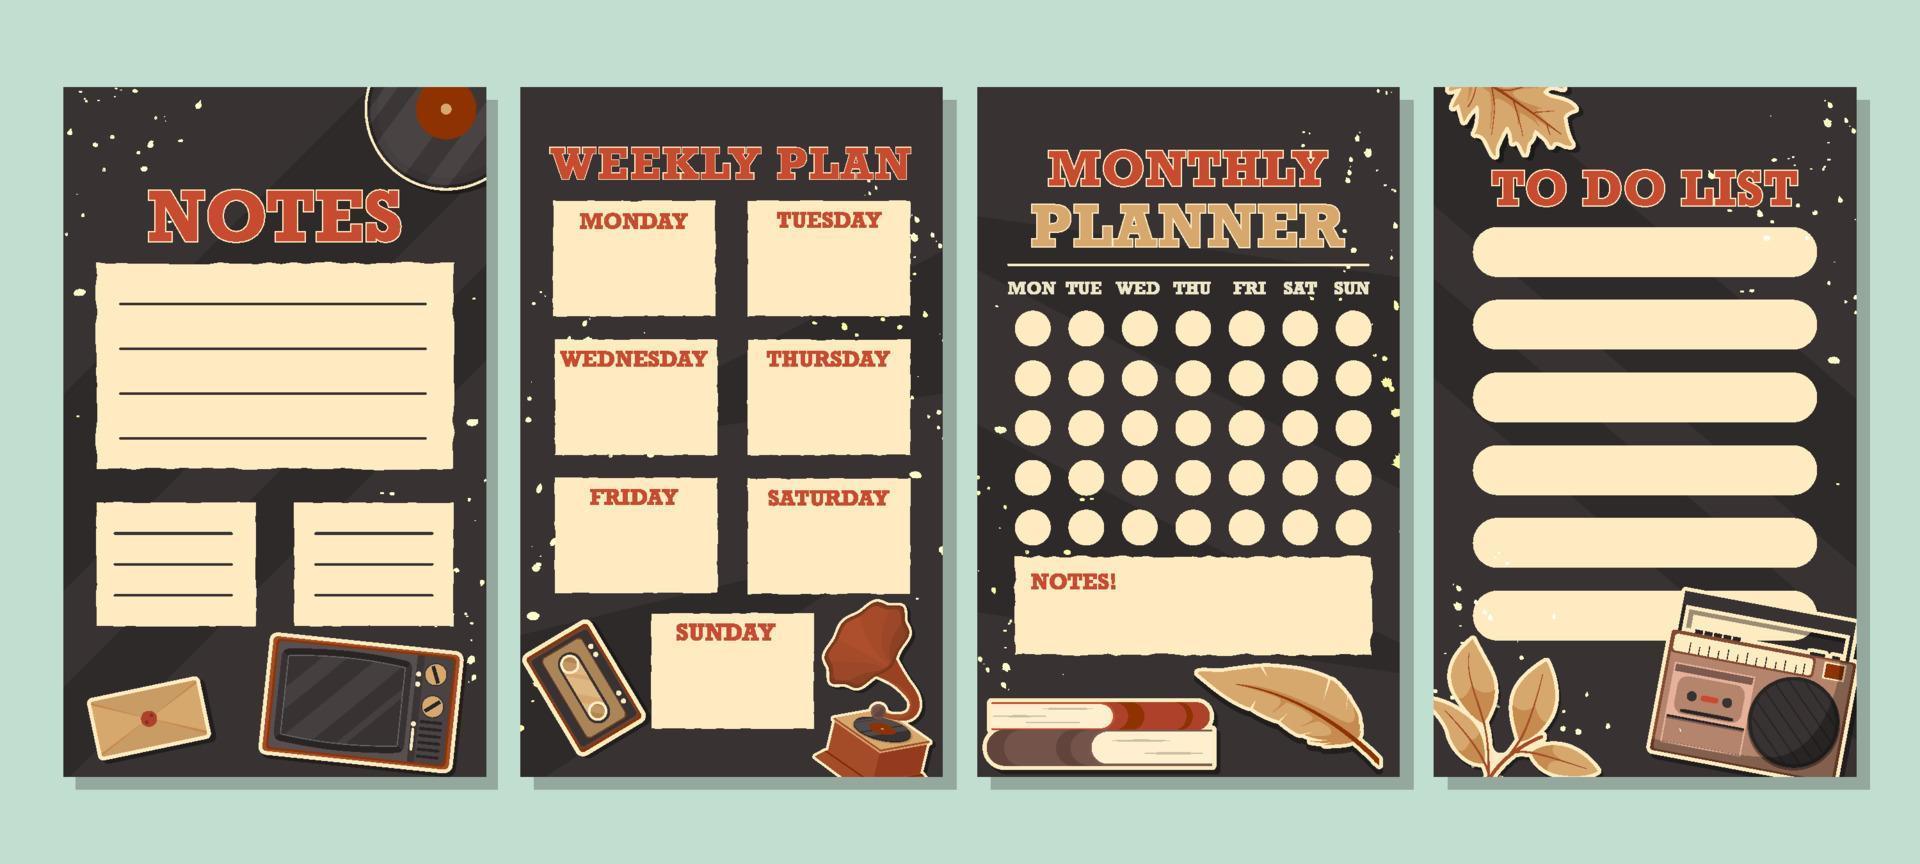 Daily Journal with Vintage Theme vector